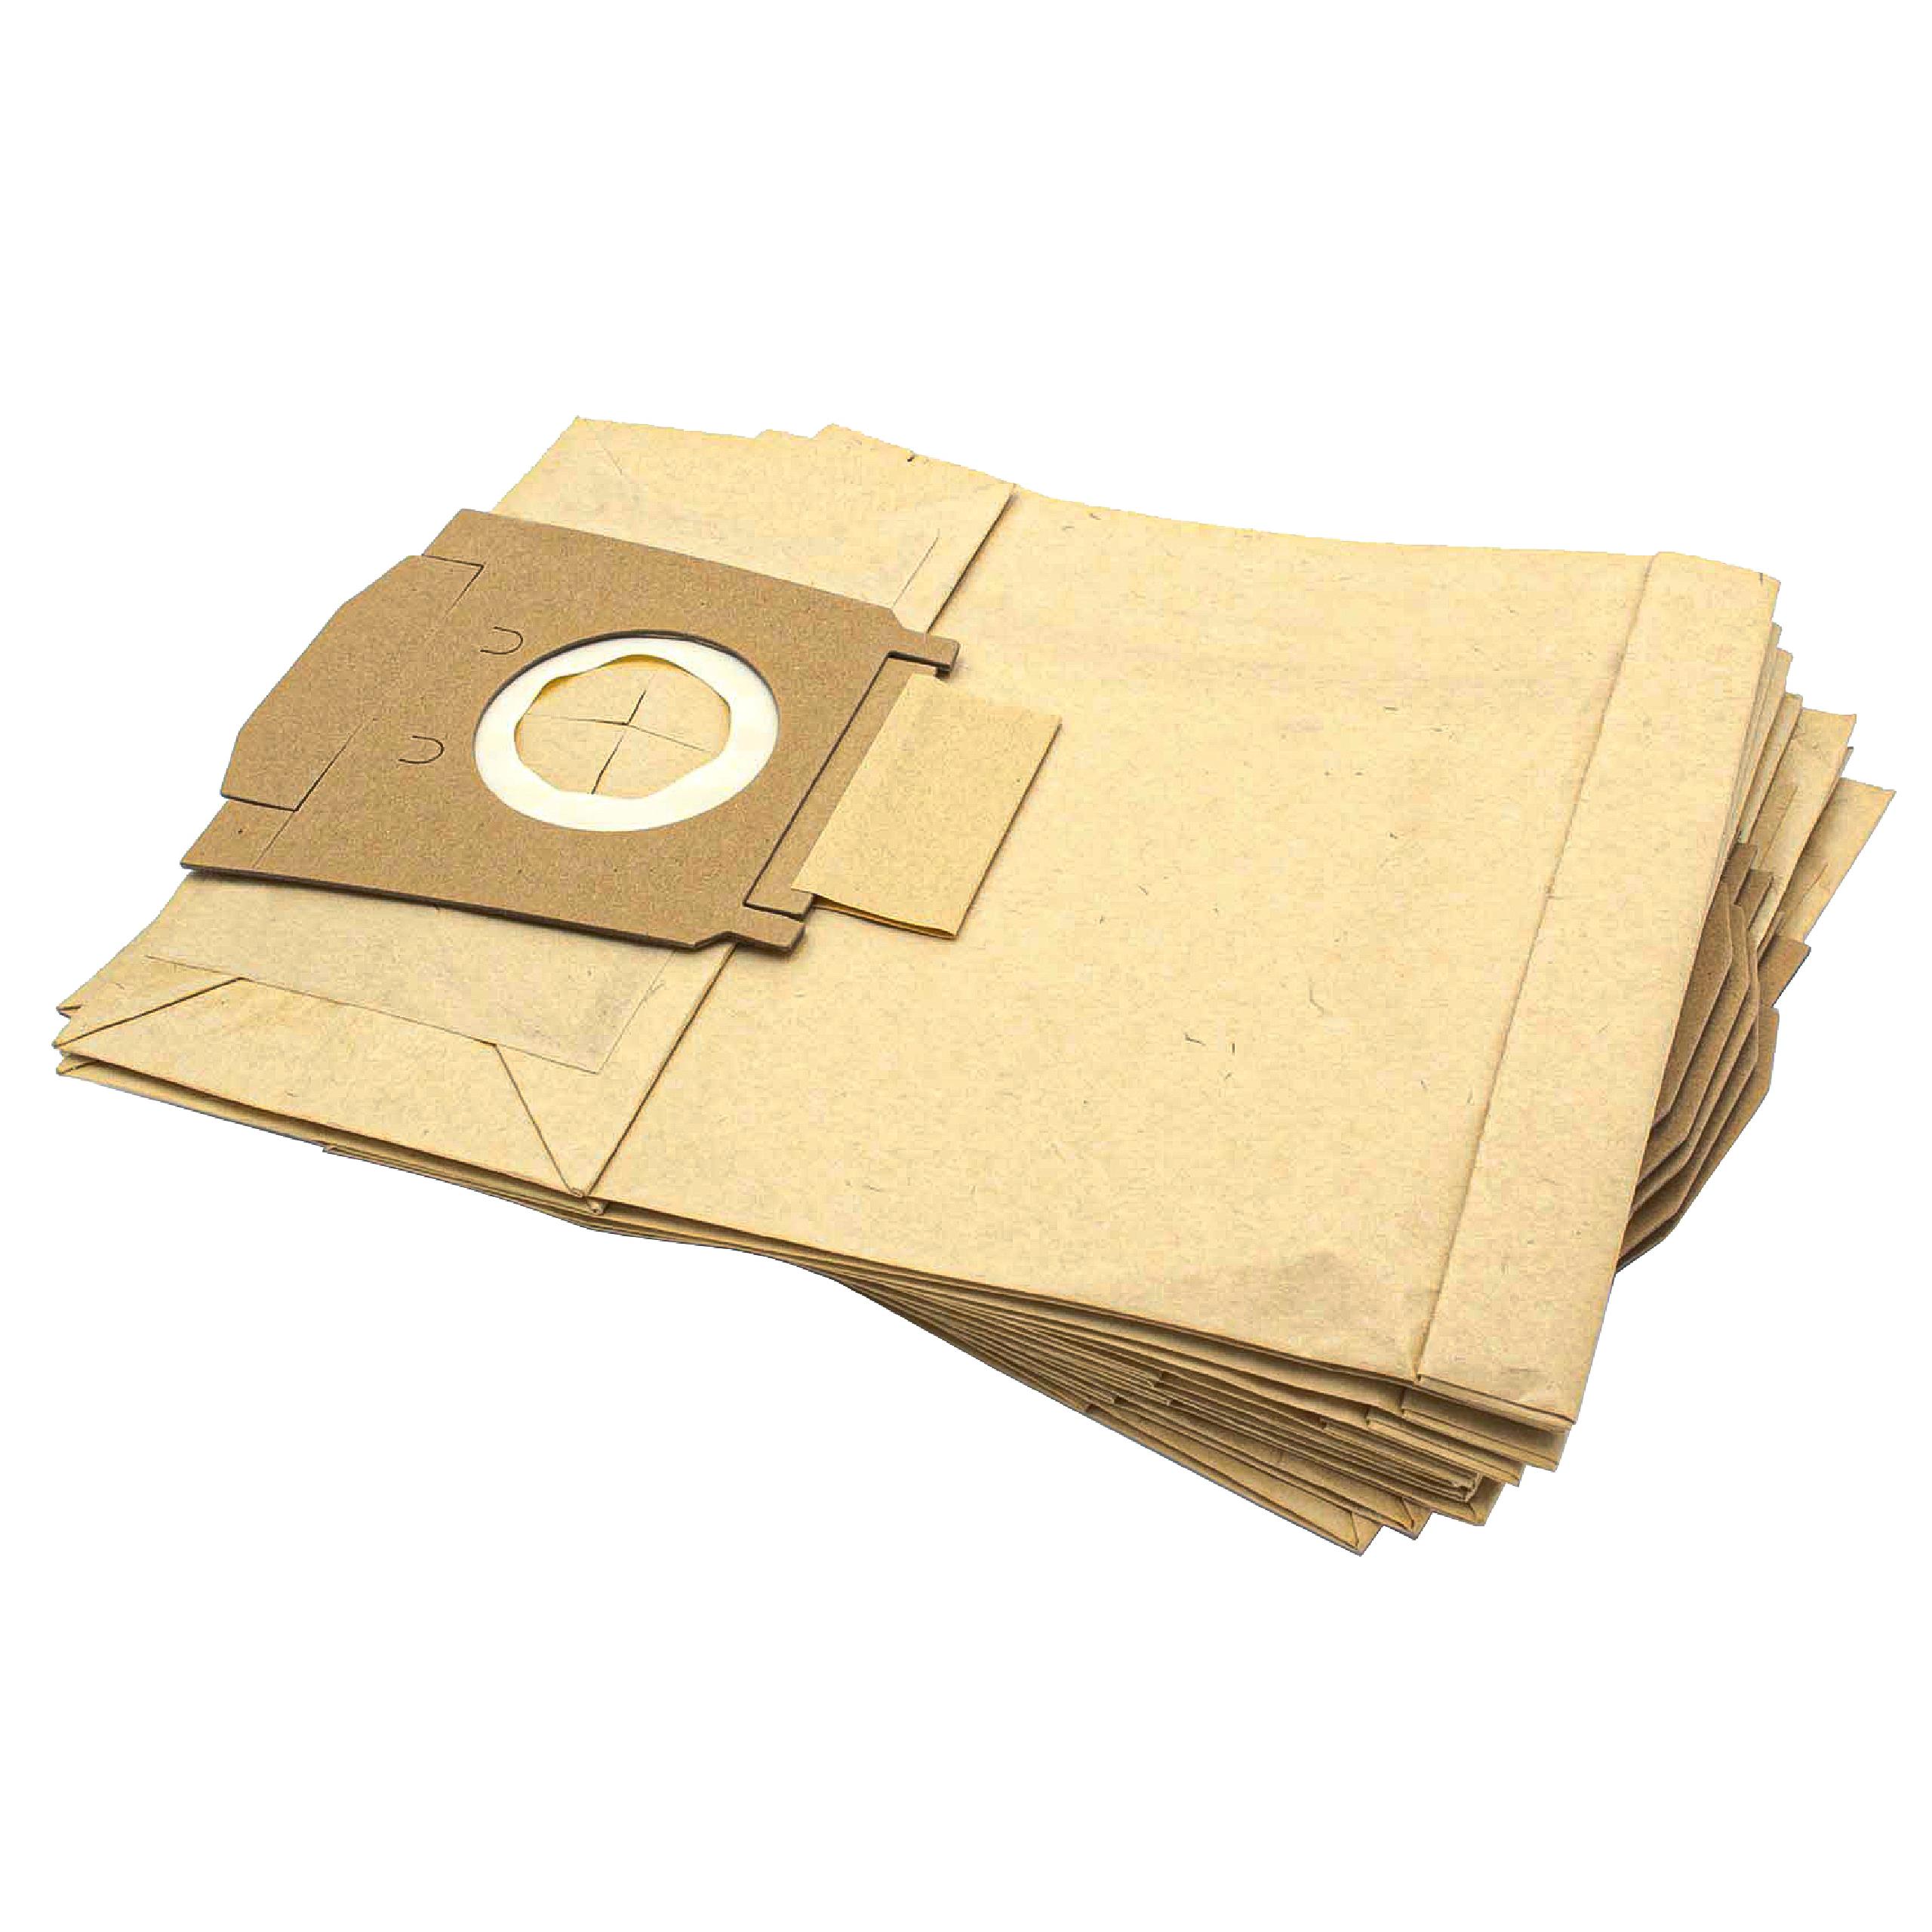 10x Vacuum Cleaner Bag replaces Adix SI106, SI170 for Bosch - paper